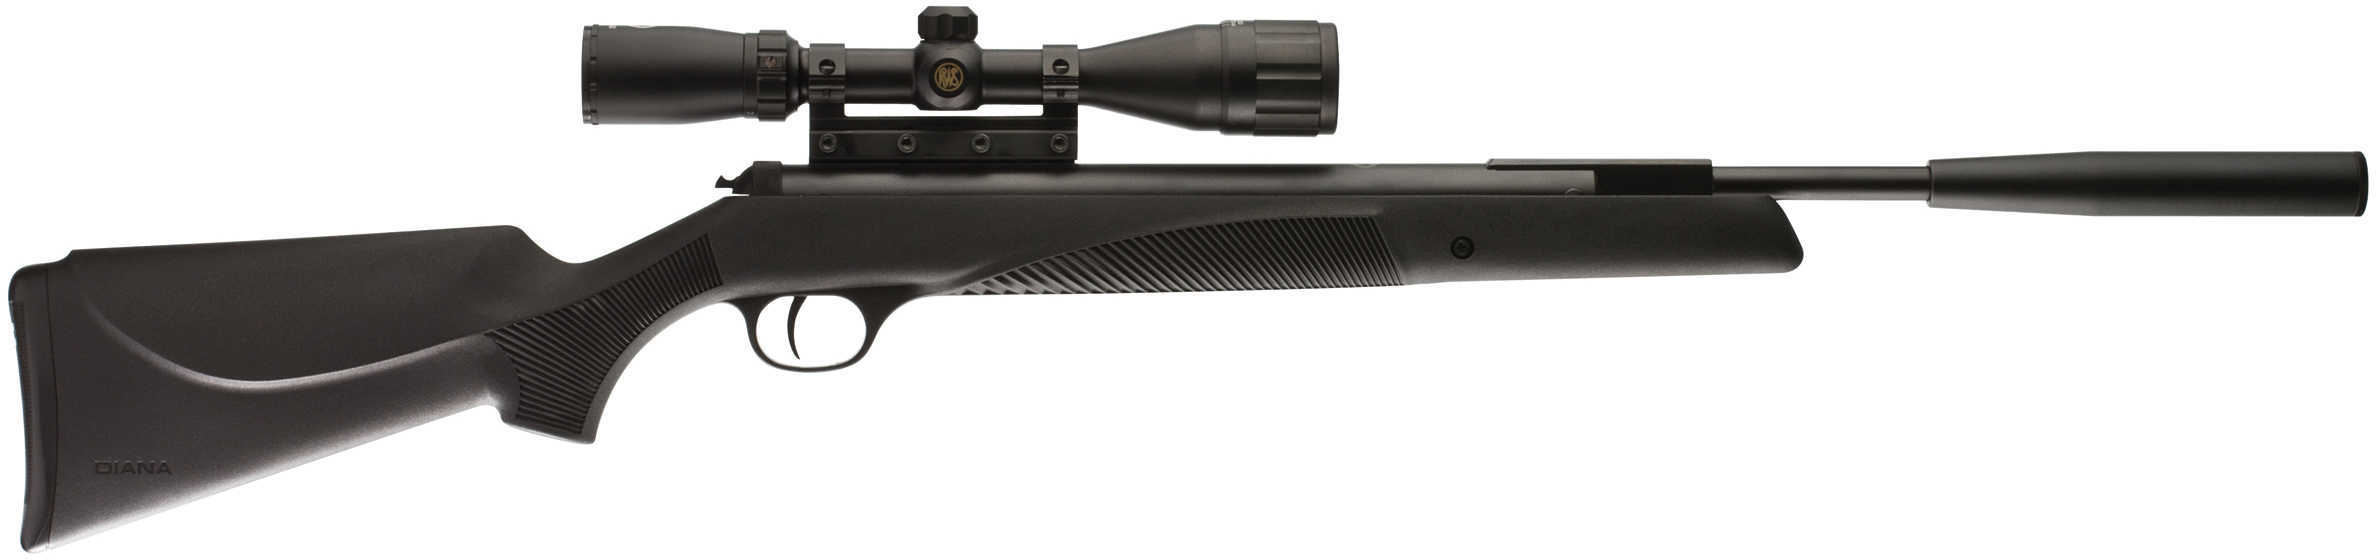 RWS Umarex 34 Panther Pro Compact Air Rifle .177 Pellet 1000 15.75 Blue Synthetic W/3X9 Scope Box Single Shot Md: 2166027